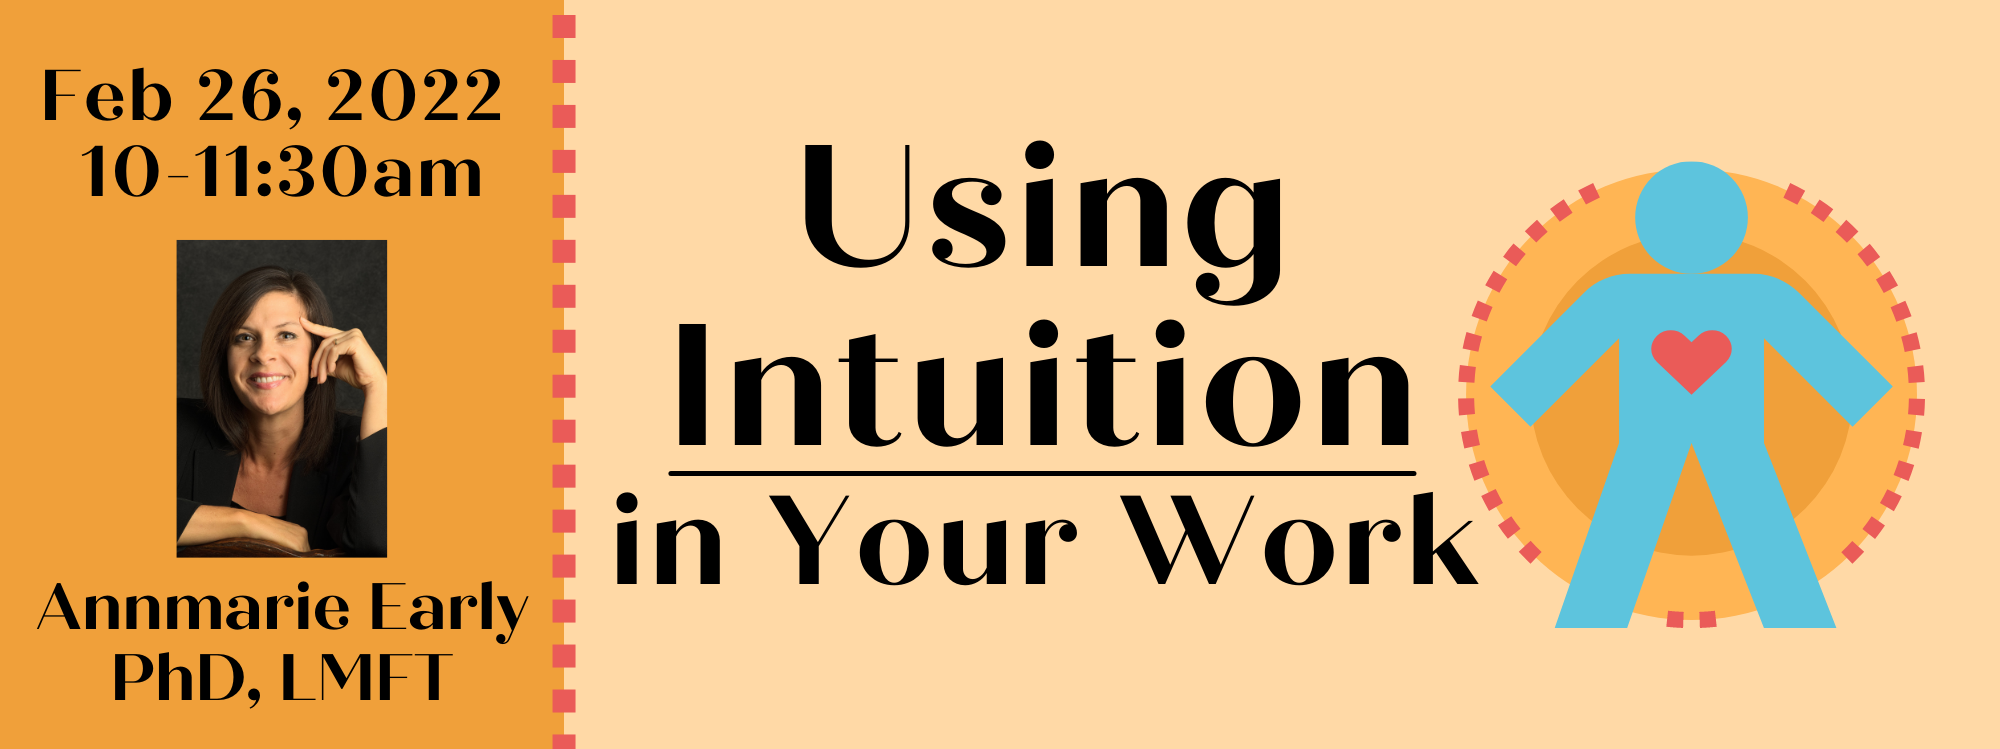 Using Intuition in Your Work